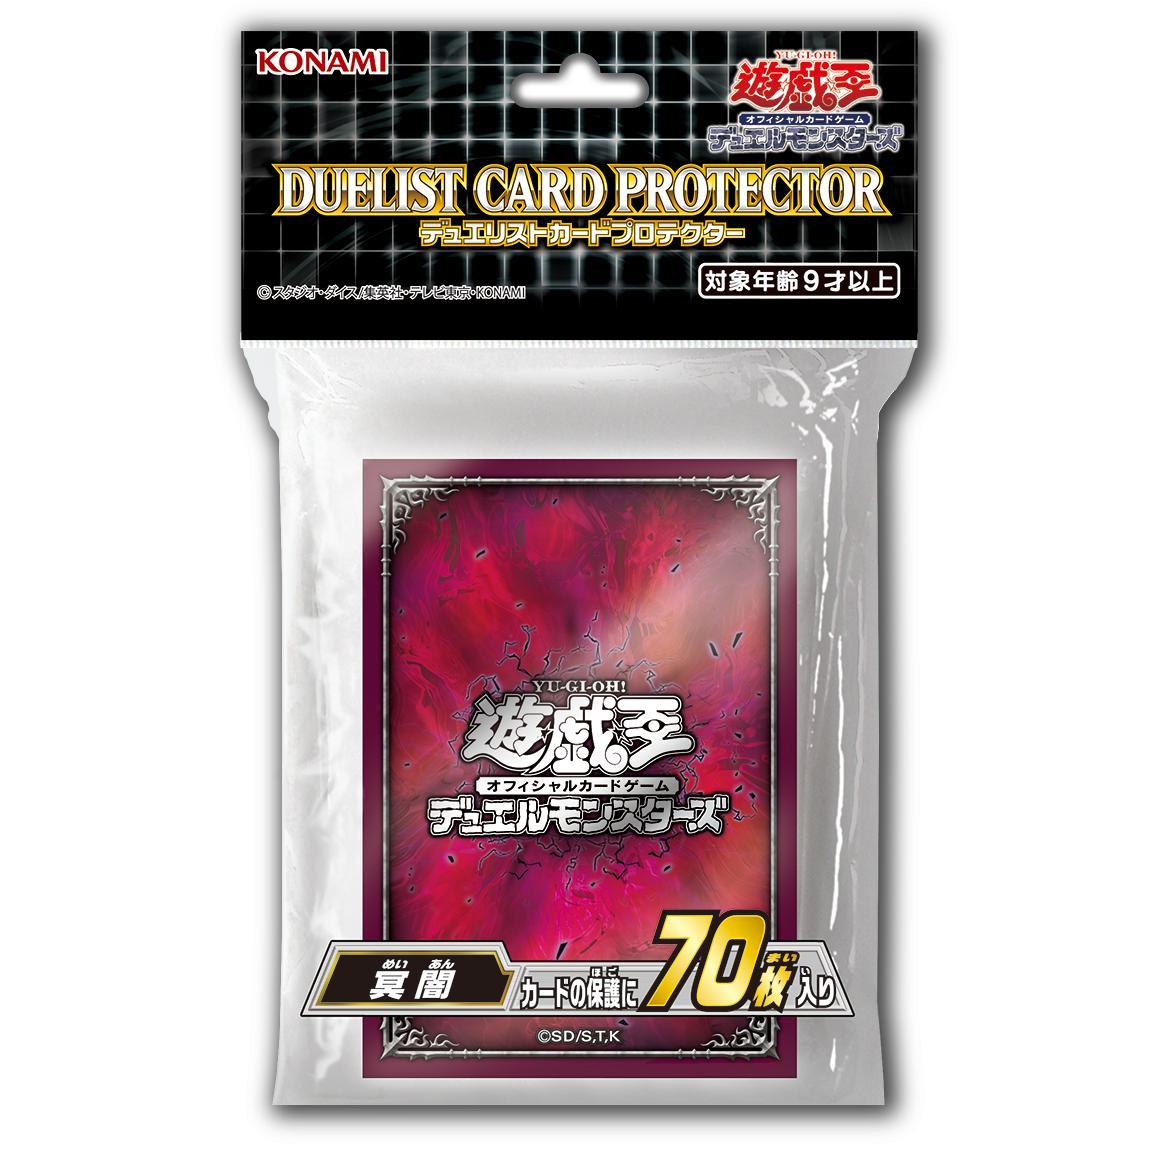 Yu-Gi-Oh! OCG Duelist Card Protector "Darkness"-Konami-Ace Cards & Collectibles